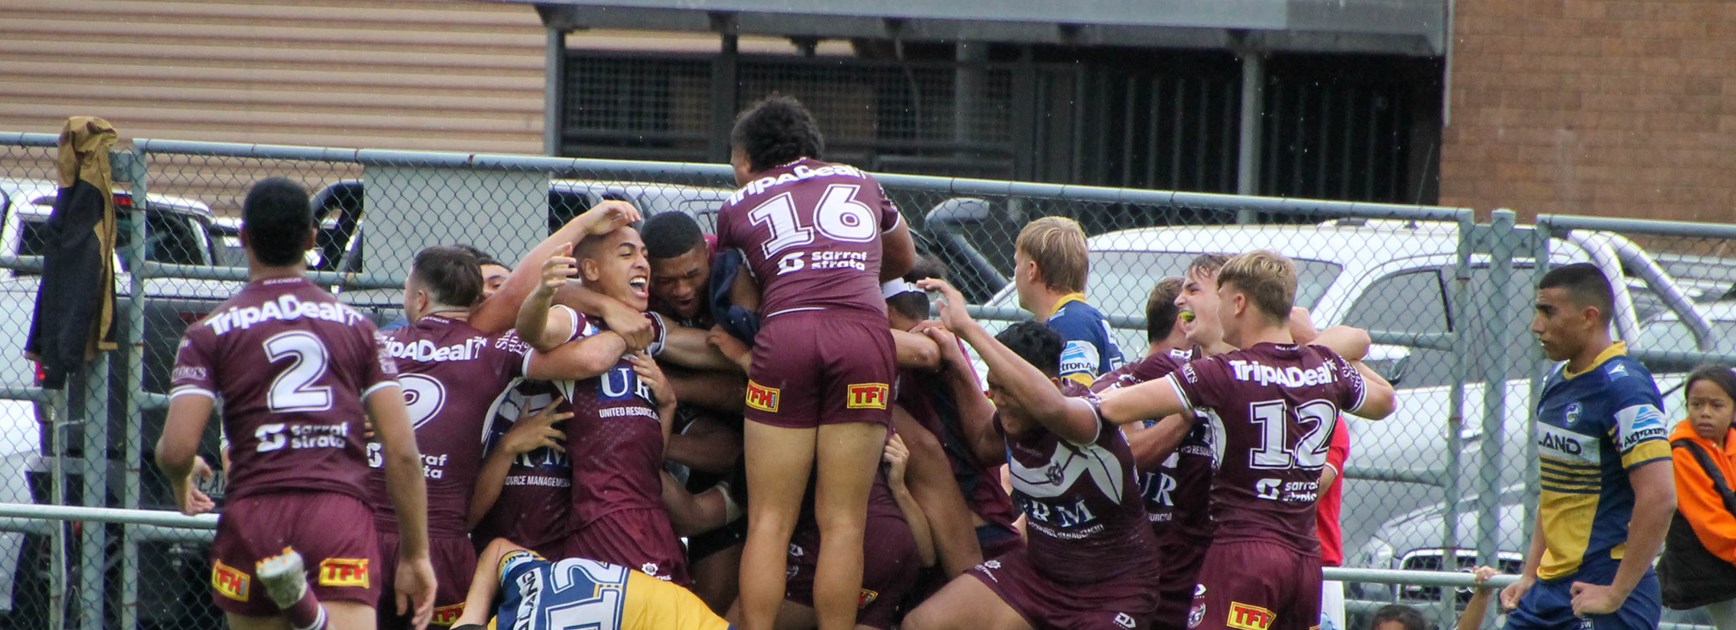 The Manly boys celebrate the match-winning try to Lehi Hopoate